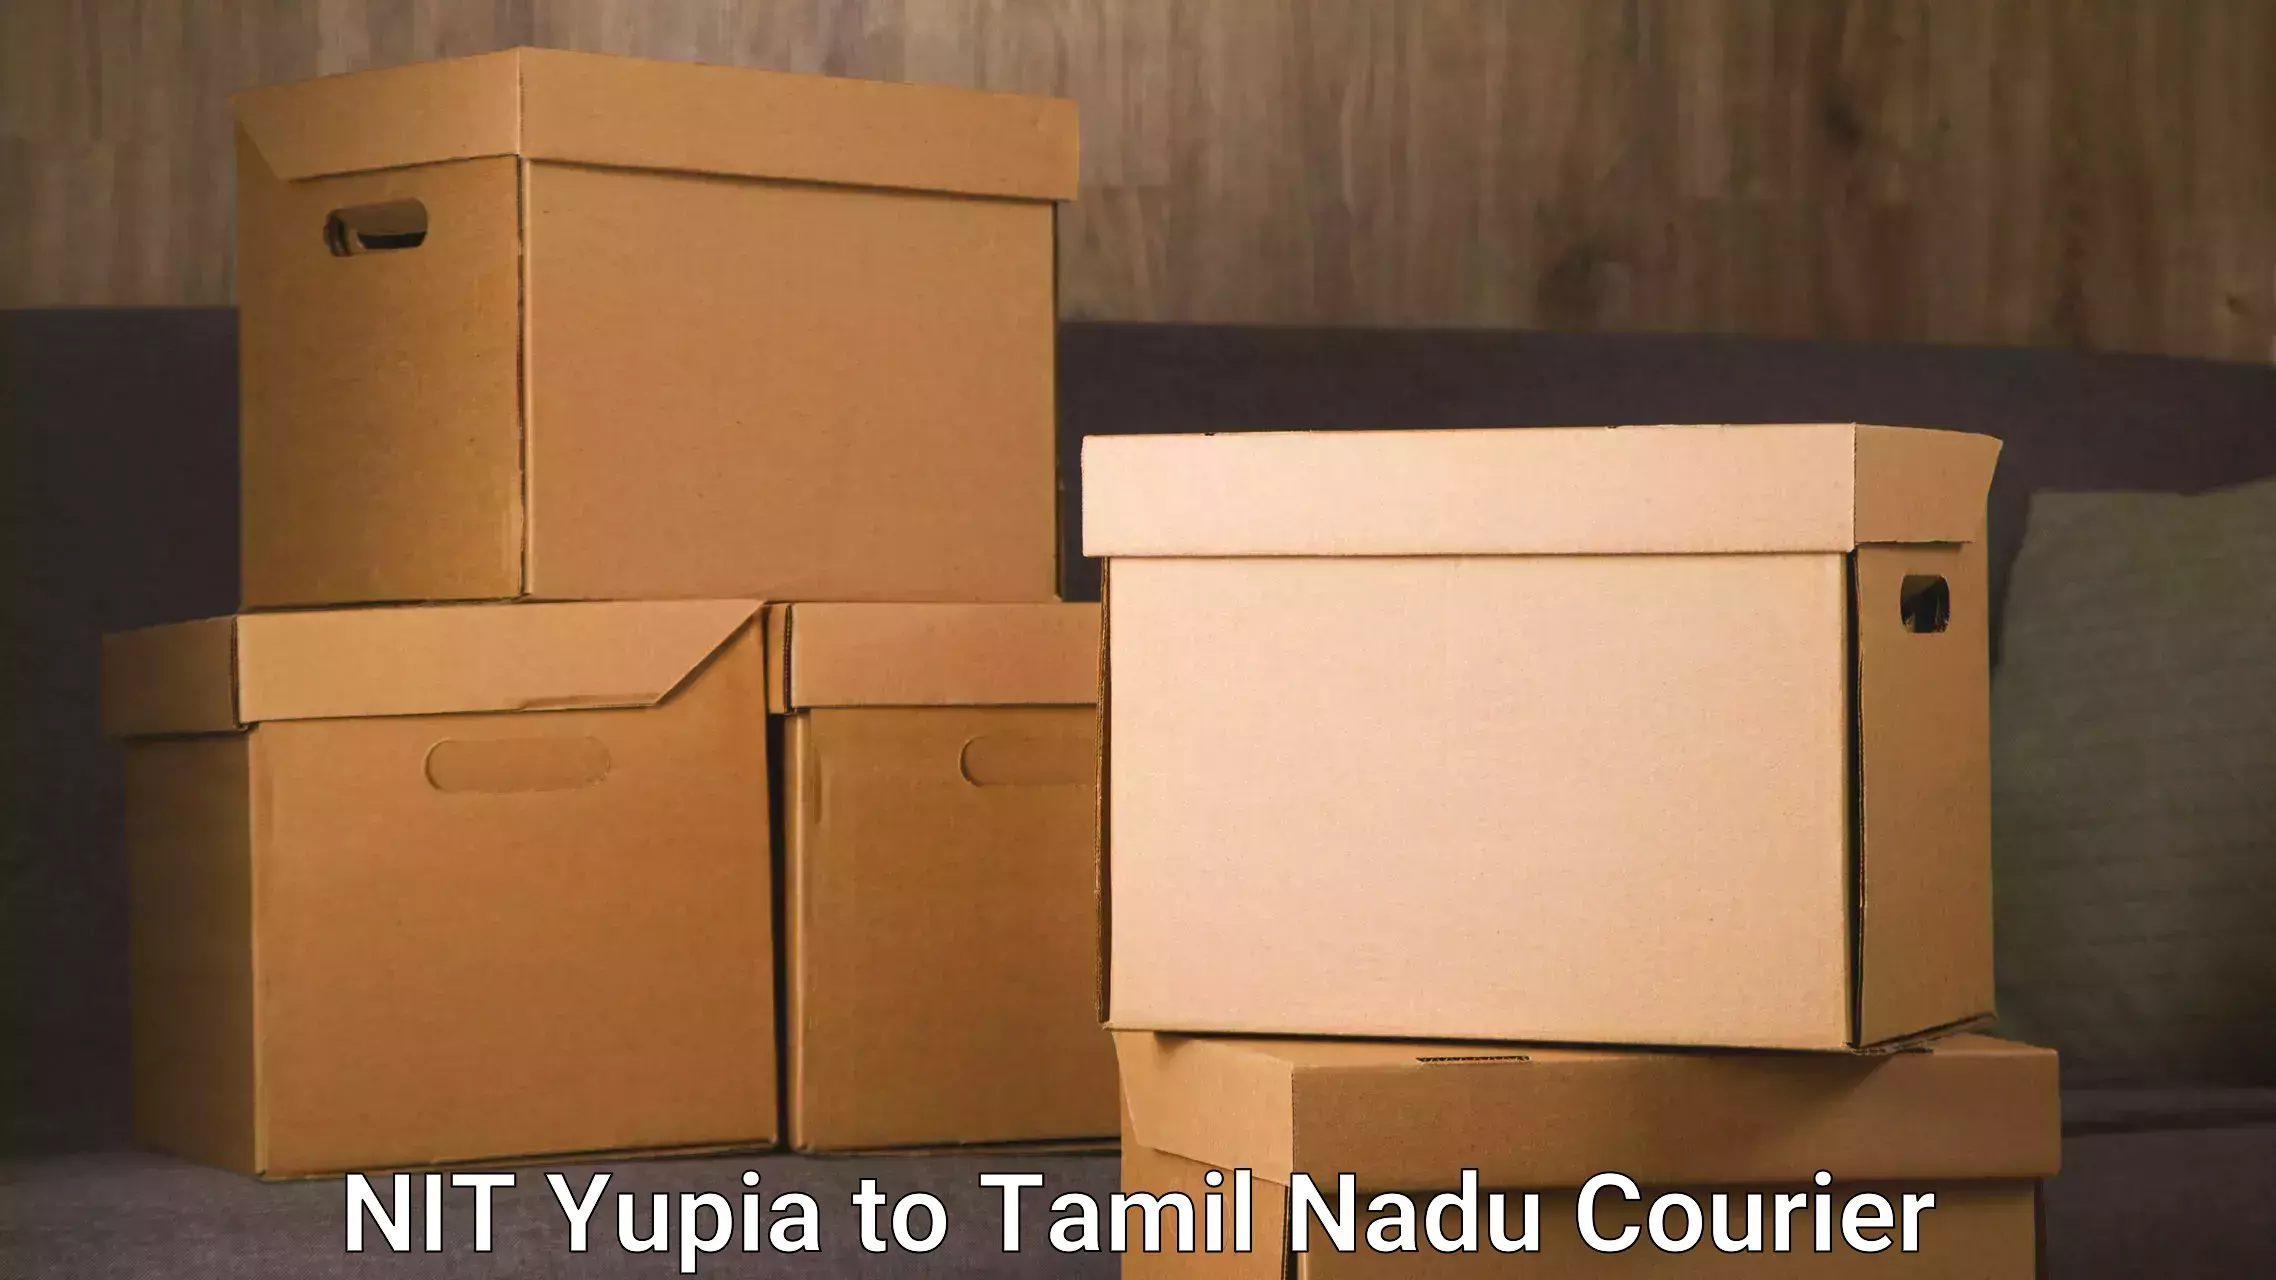 State-of-the-art courier technology NIT Yupia to Thanjavur